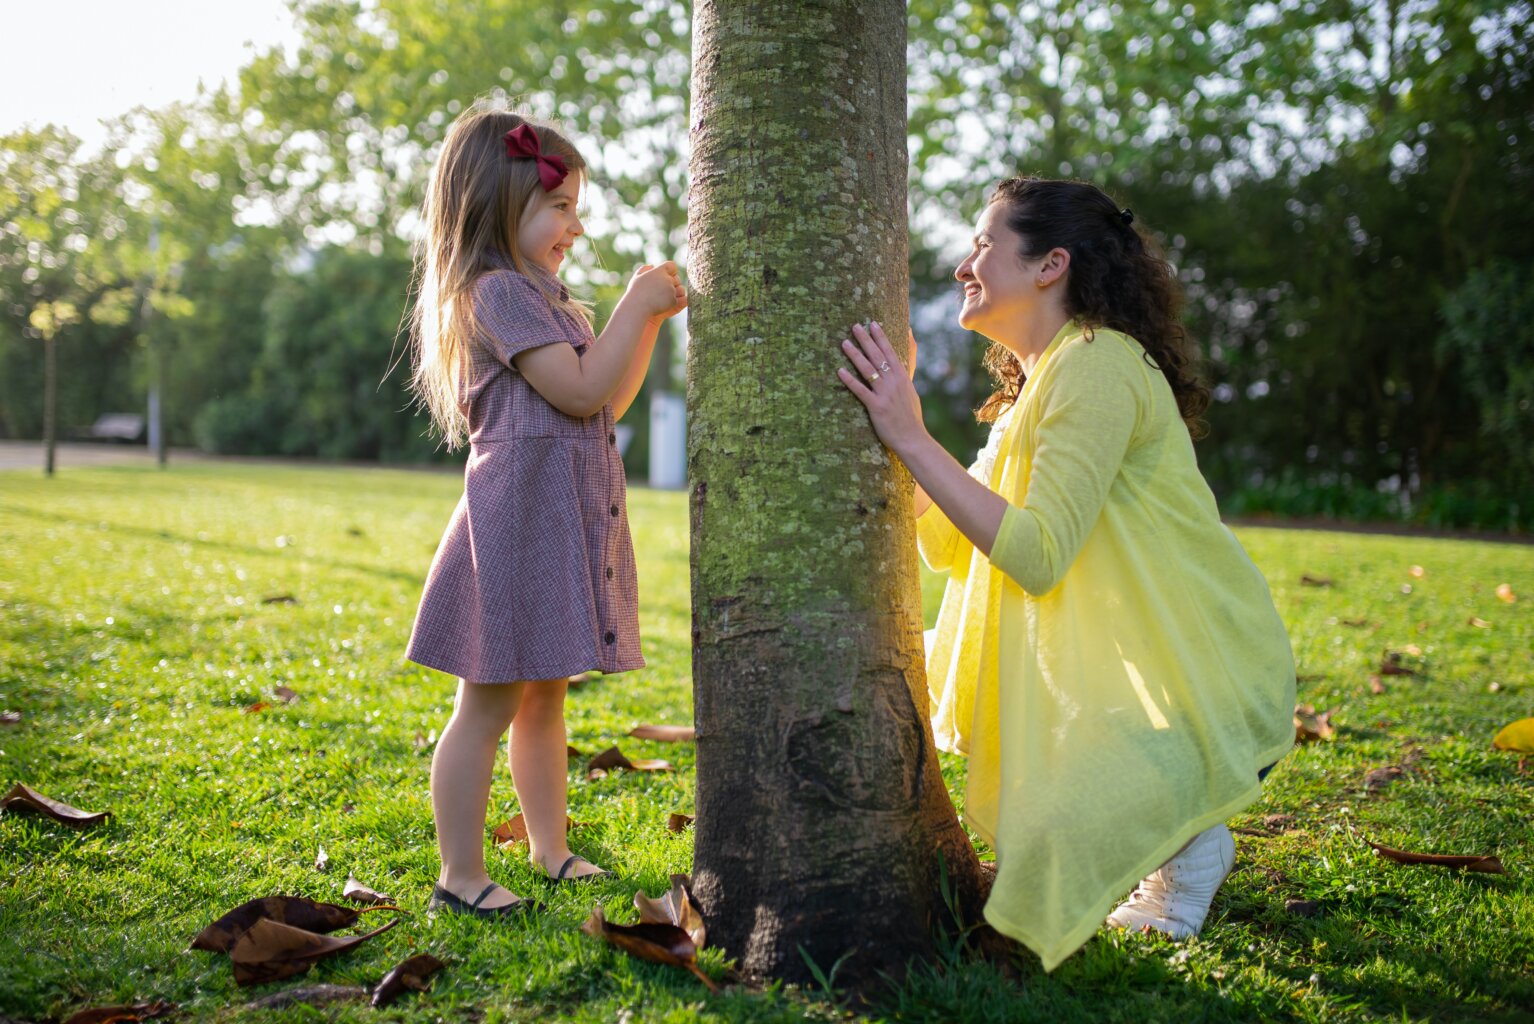 A mom and daughter playing around a tree.